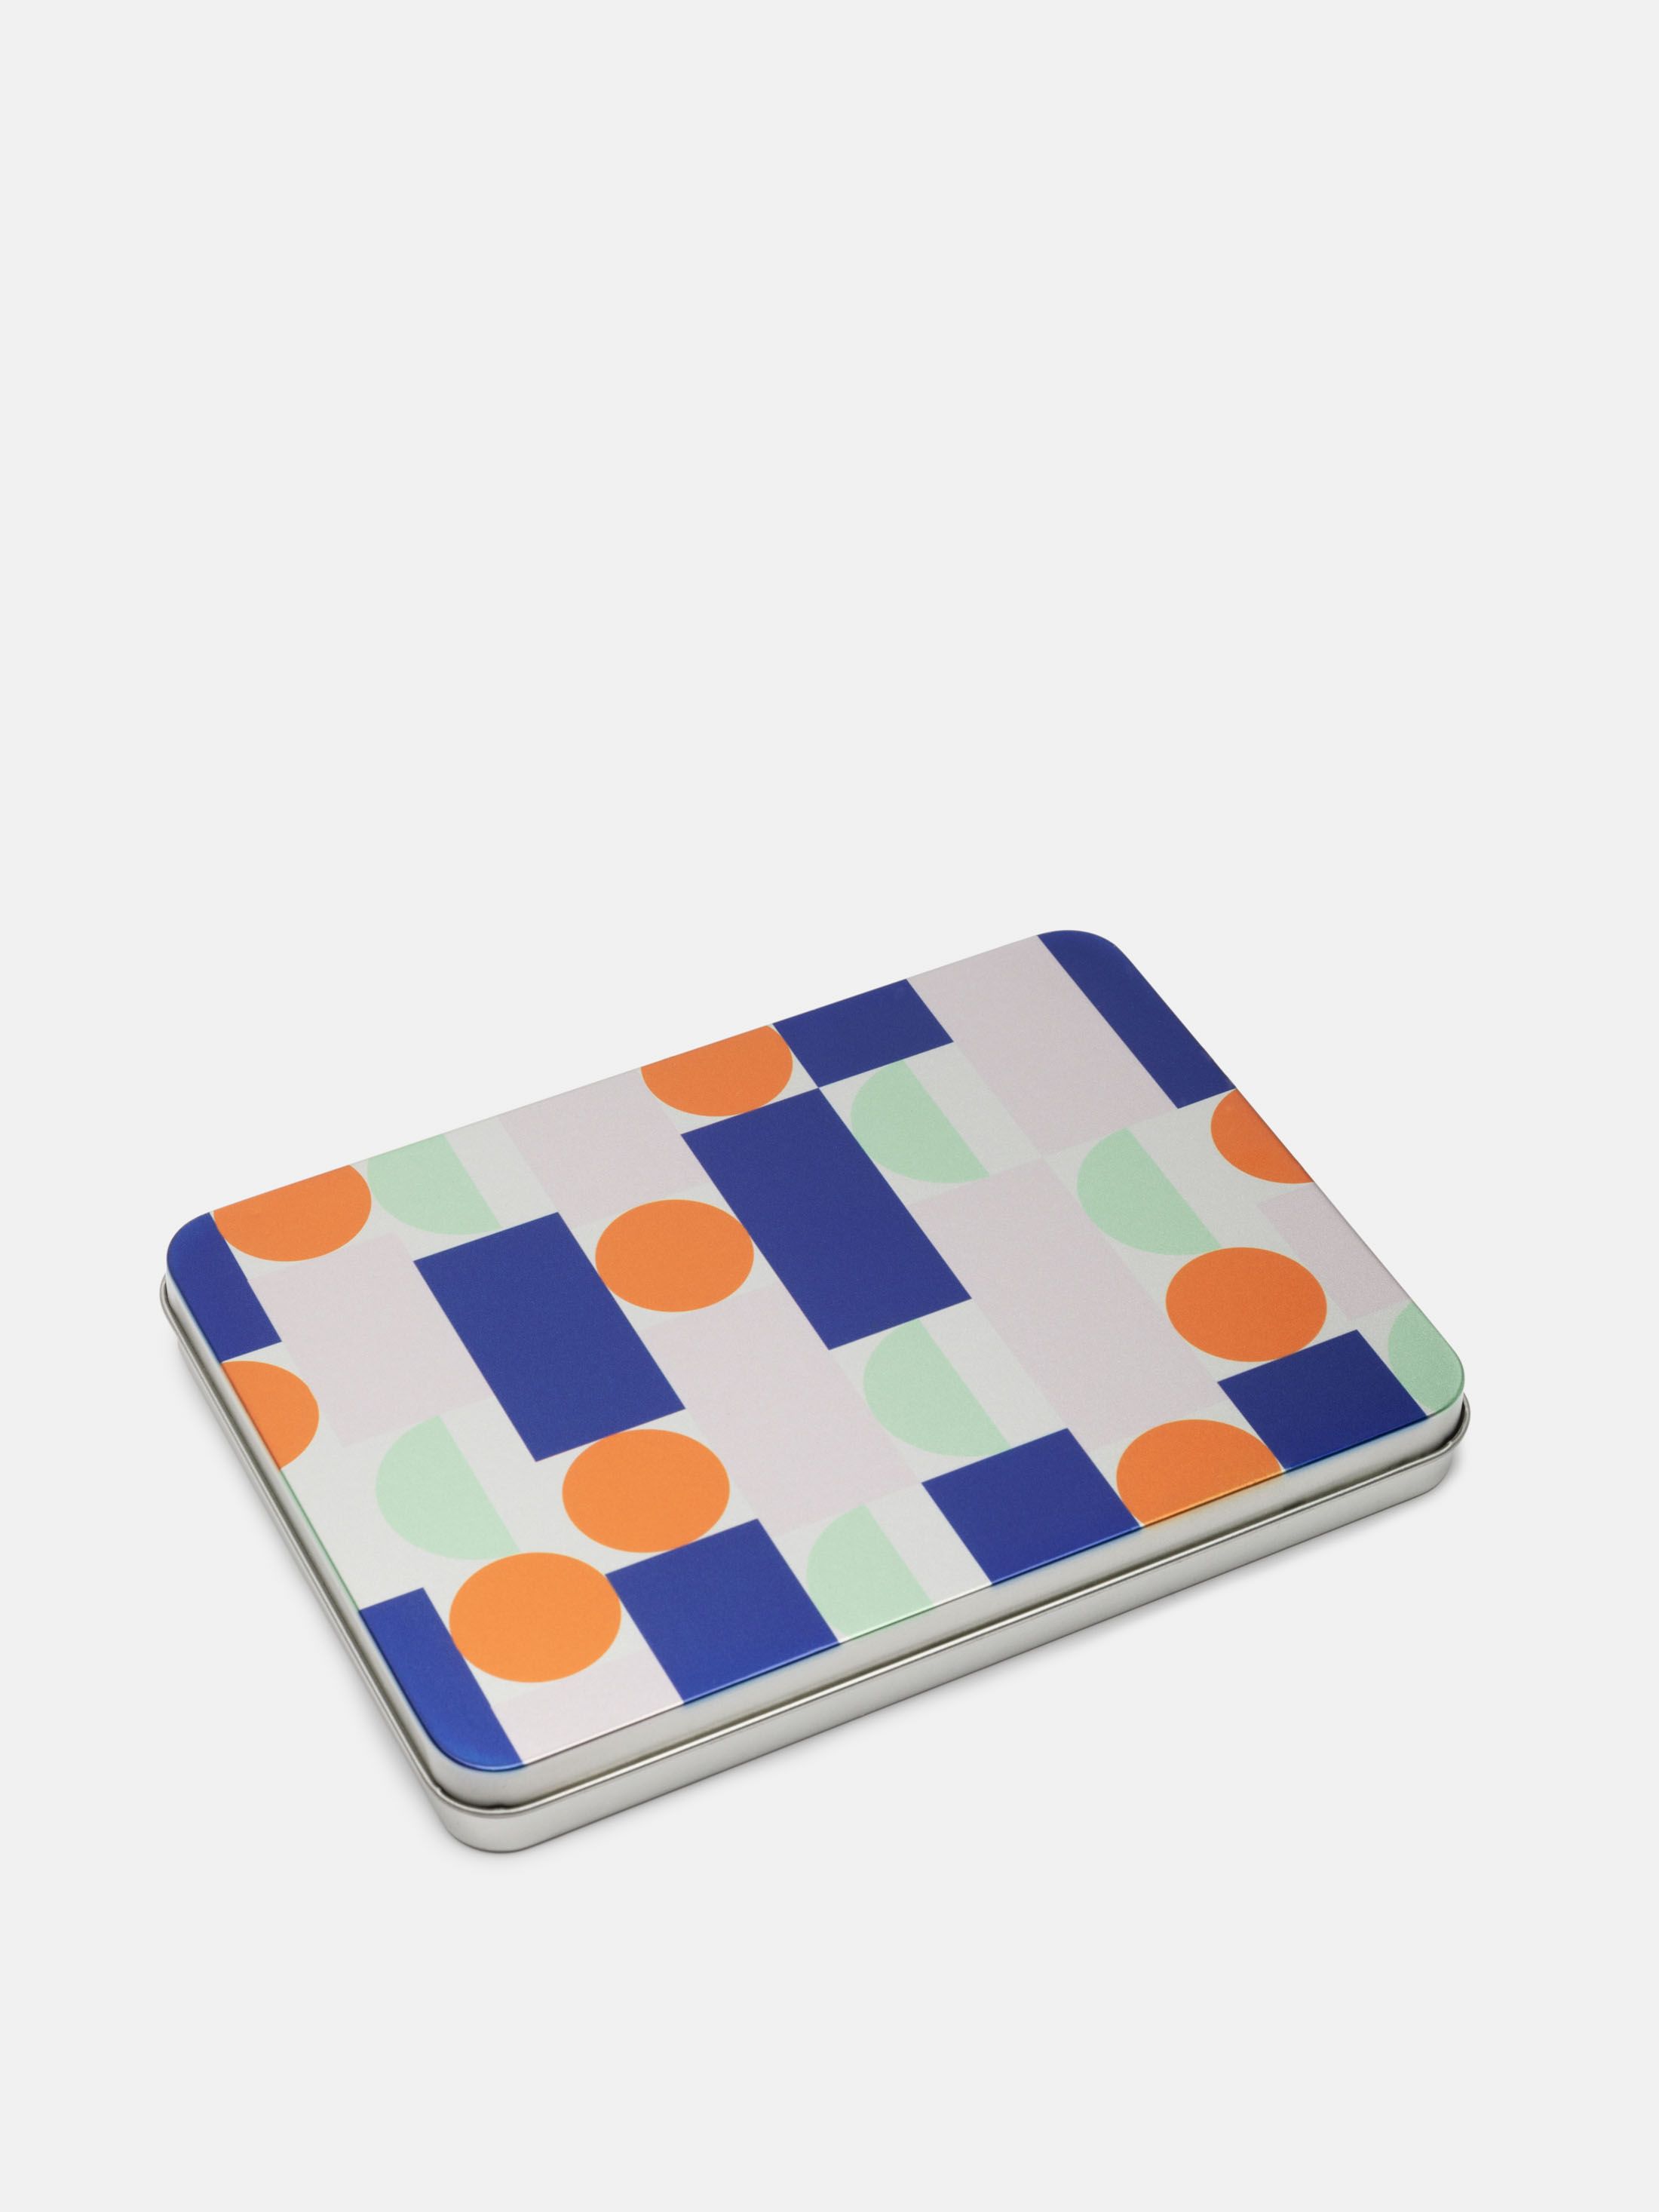 customized tin box with geometric color pattern